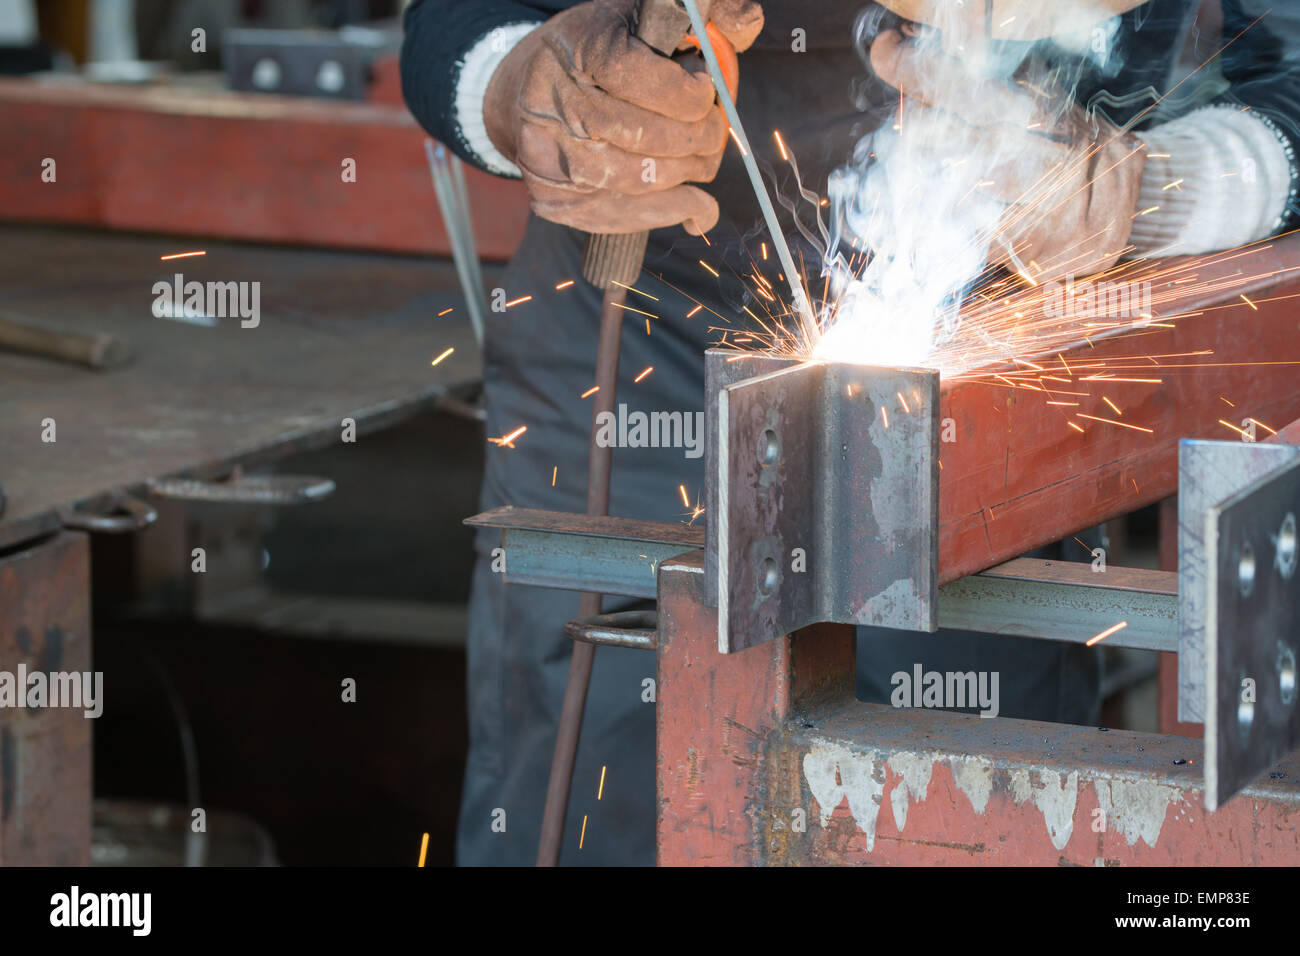 A welder welding creating sparks and smoke. Stock Photo